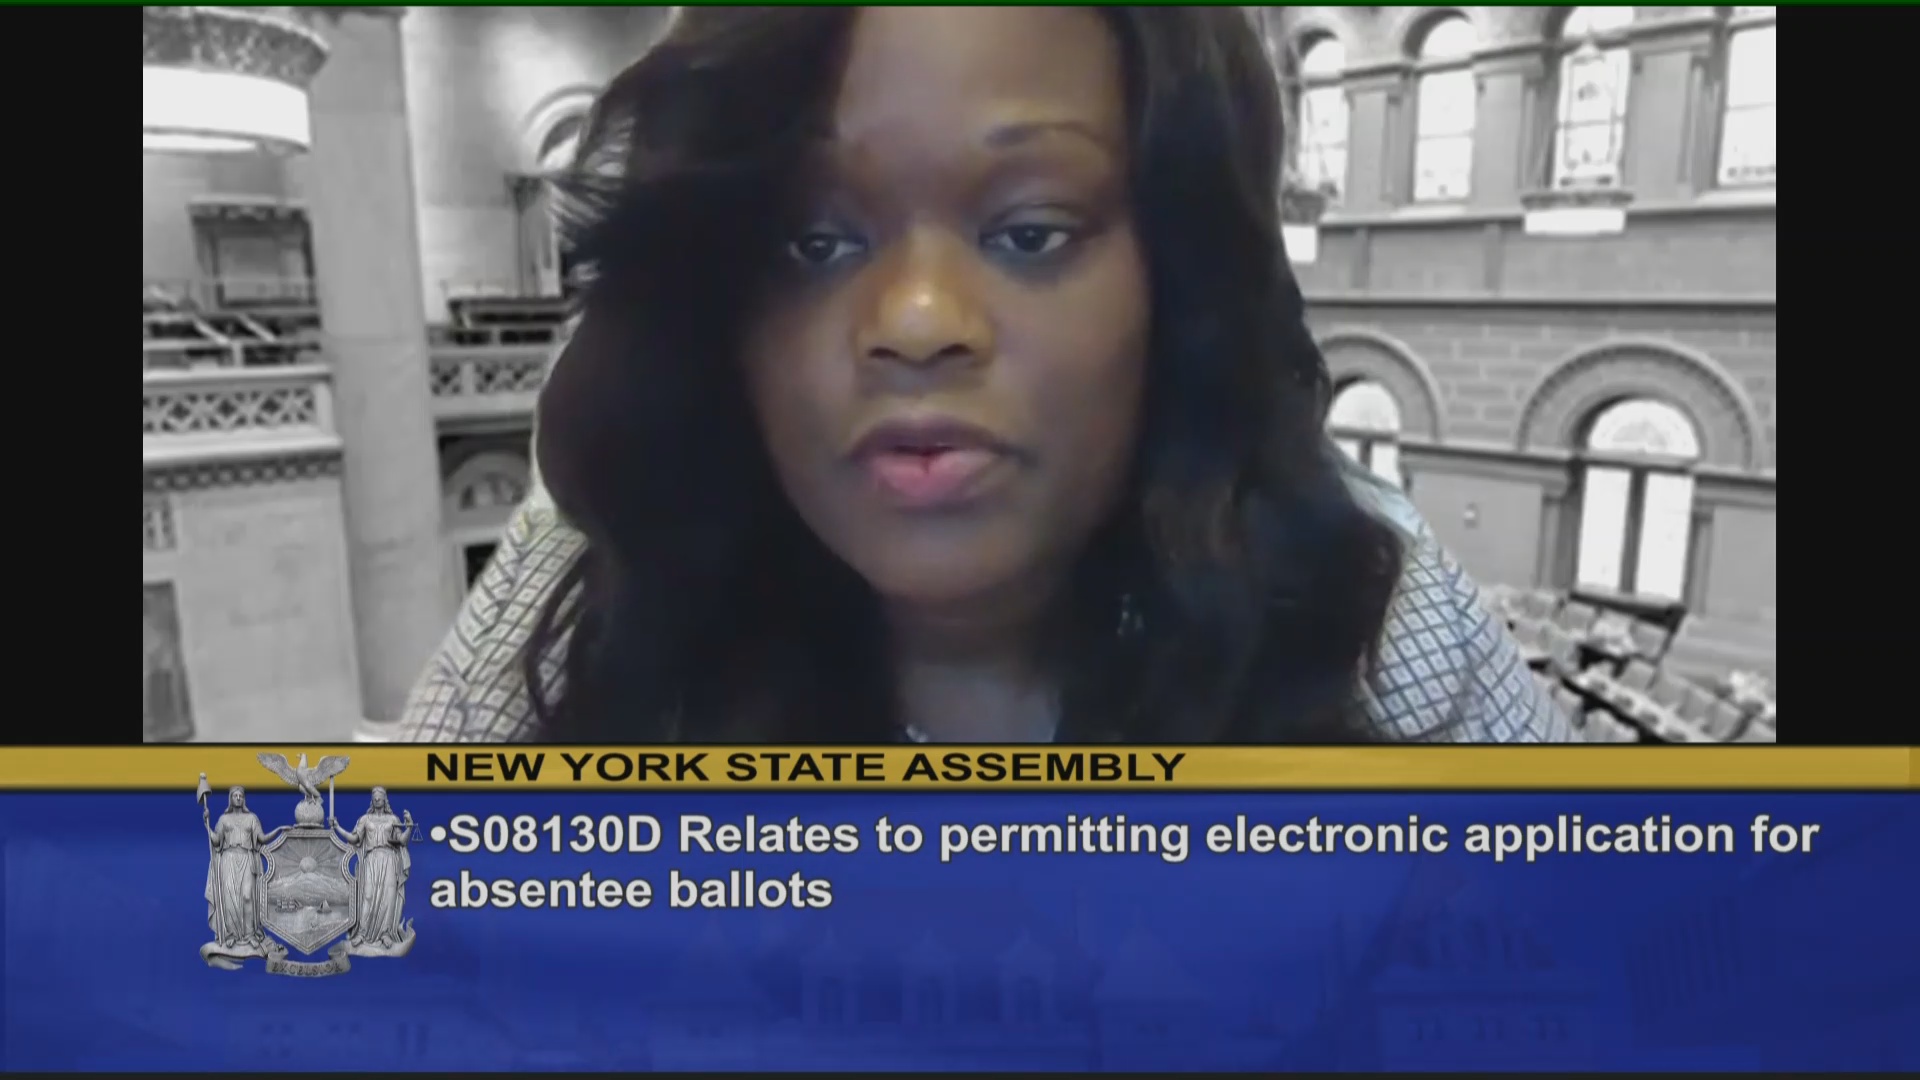 Allowing Electronic Application for Absentee Ballots